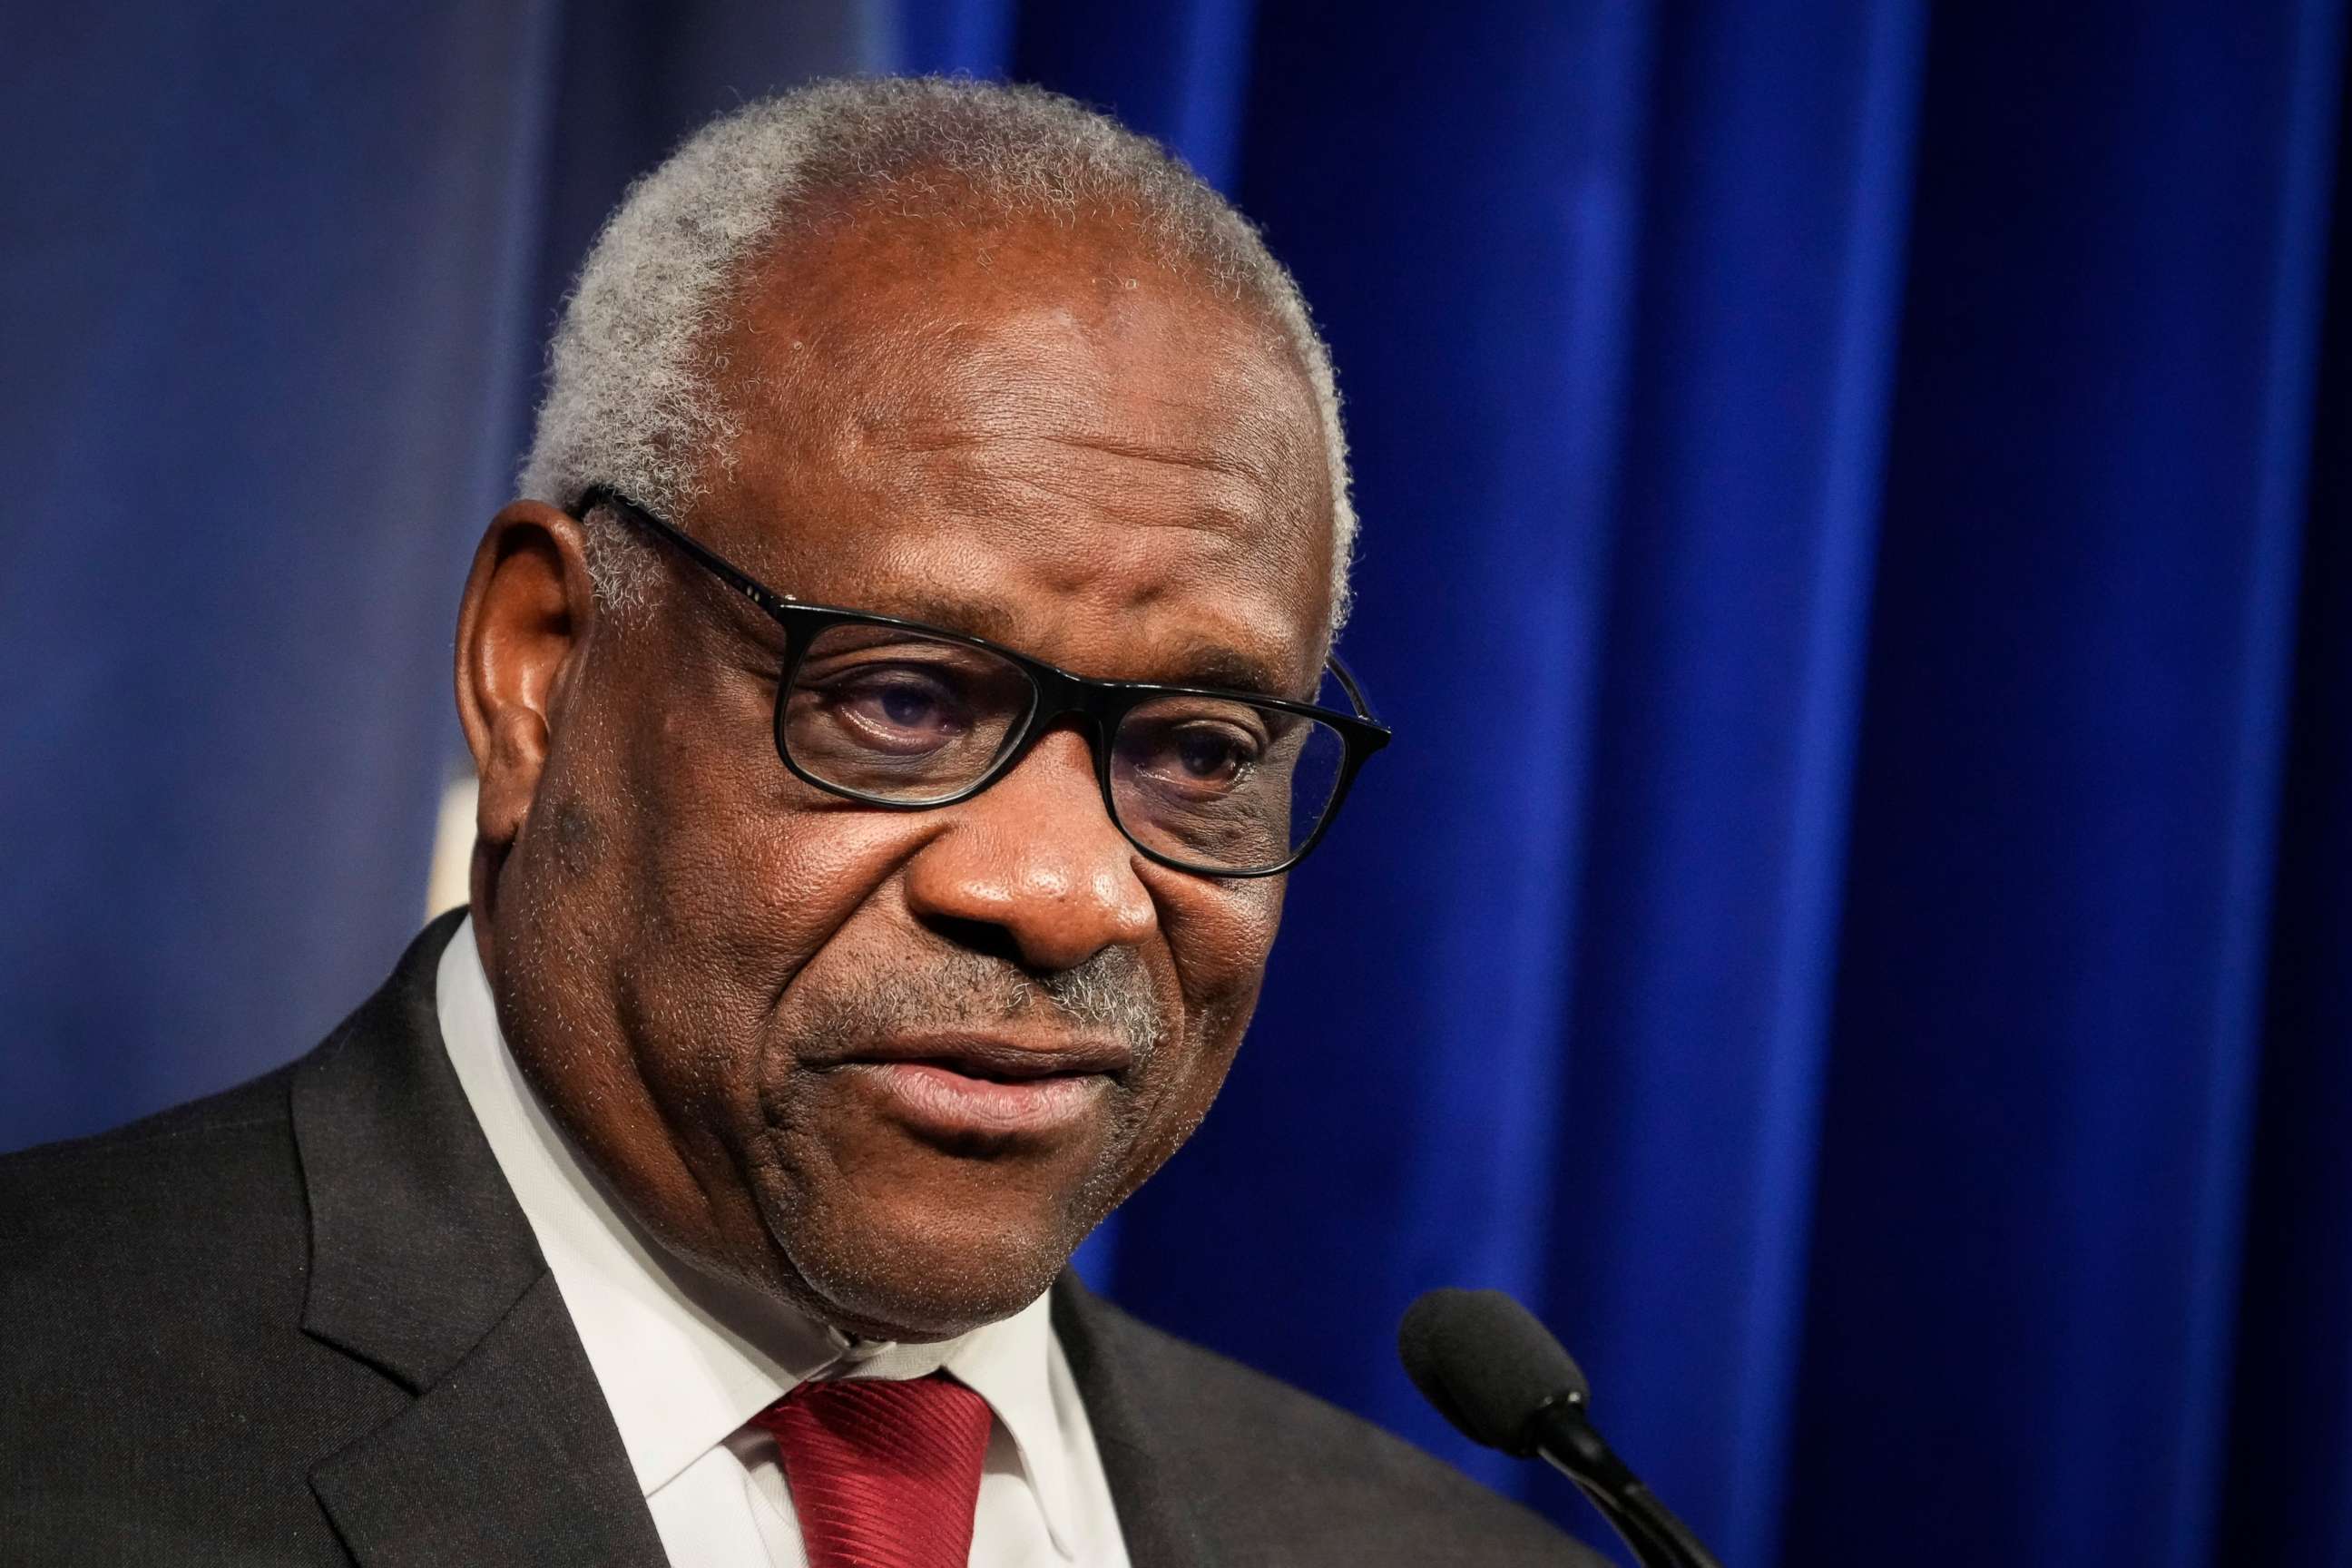 PHOTO: Associate Supreme Court Justice Clarence Thomas speaks at the Heritage Foundation on October 21, 2021 in Washington, DC.